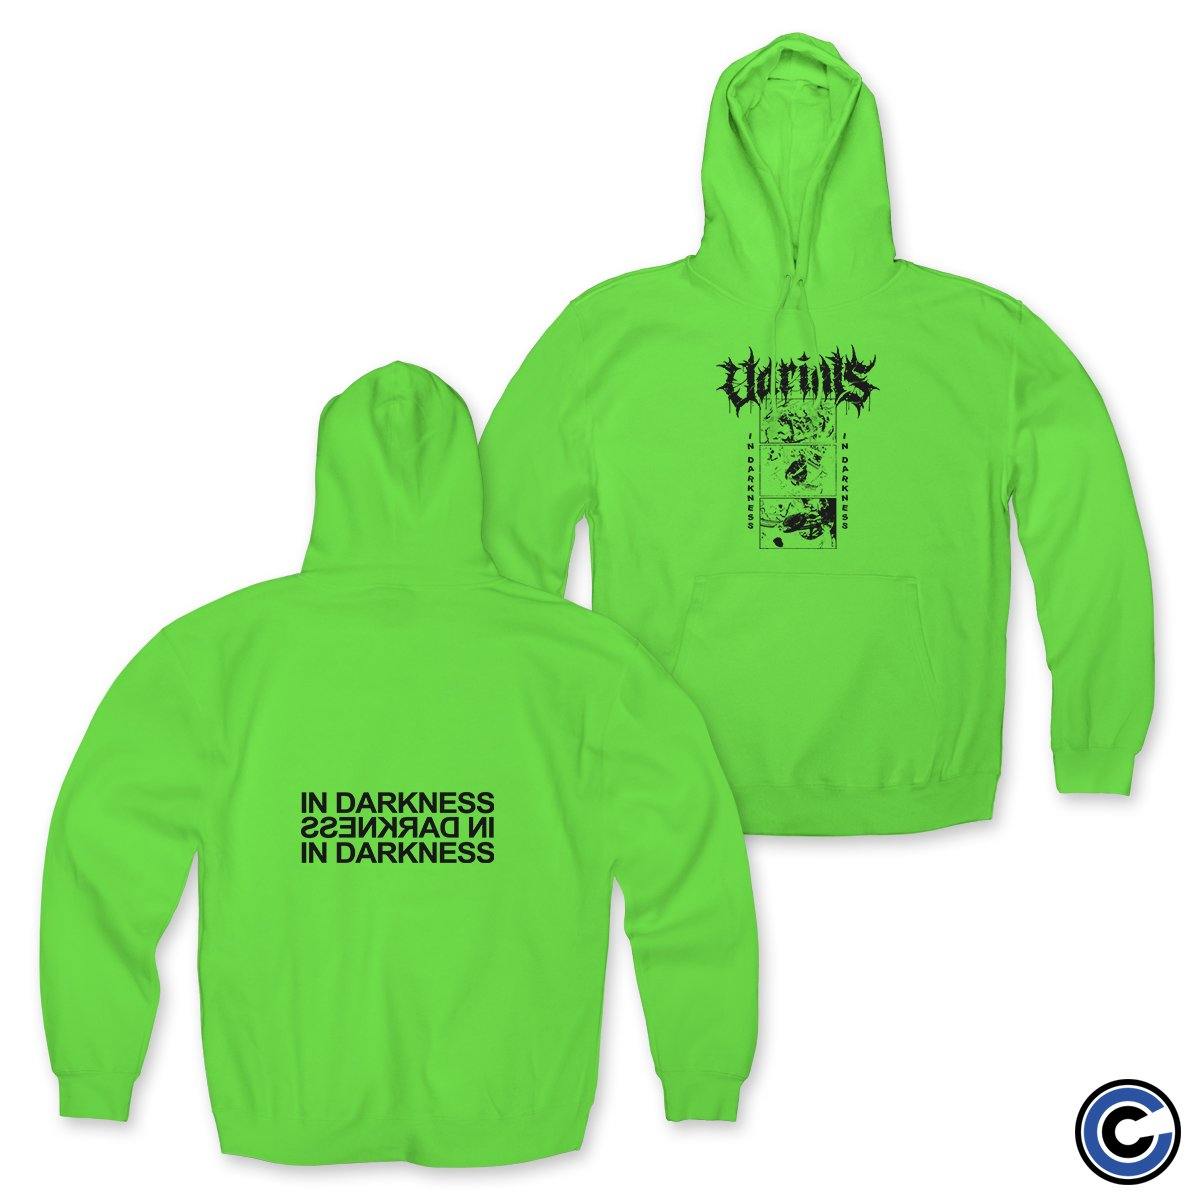 Buy – Varials "In Darkness" Hoodie – Band & Music Merch – Cold Cuts Merch